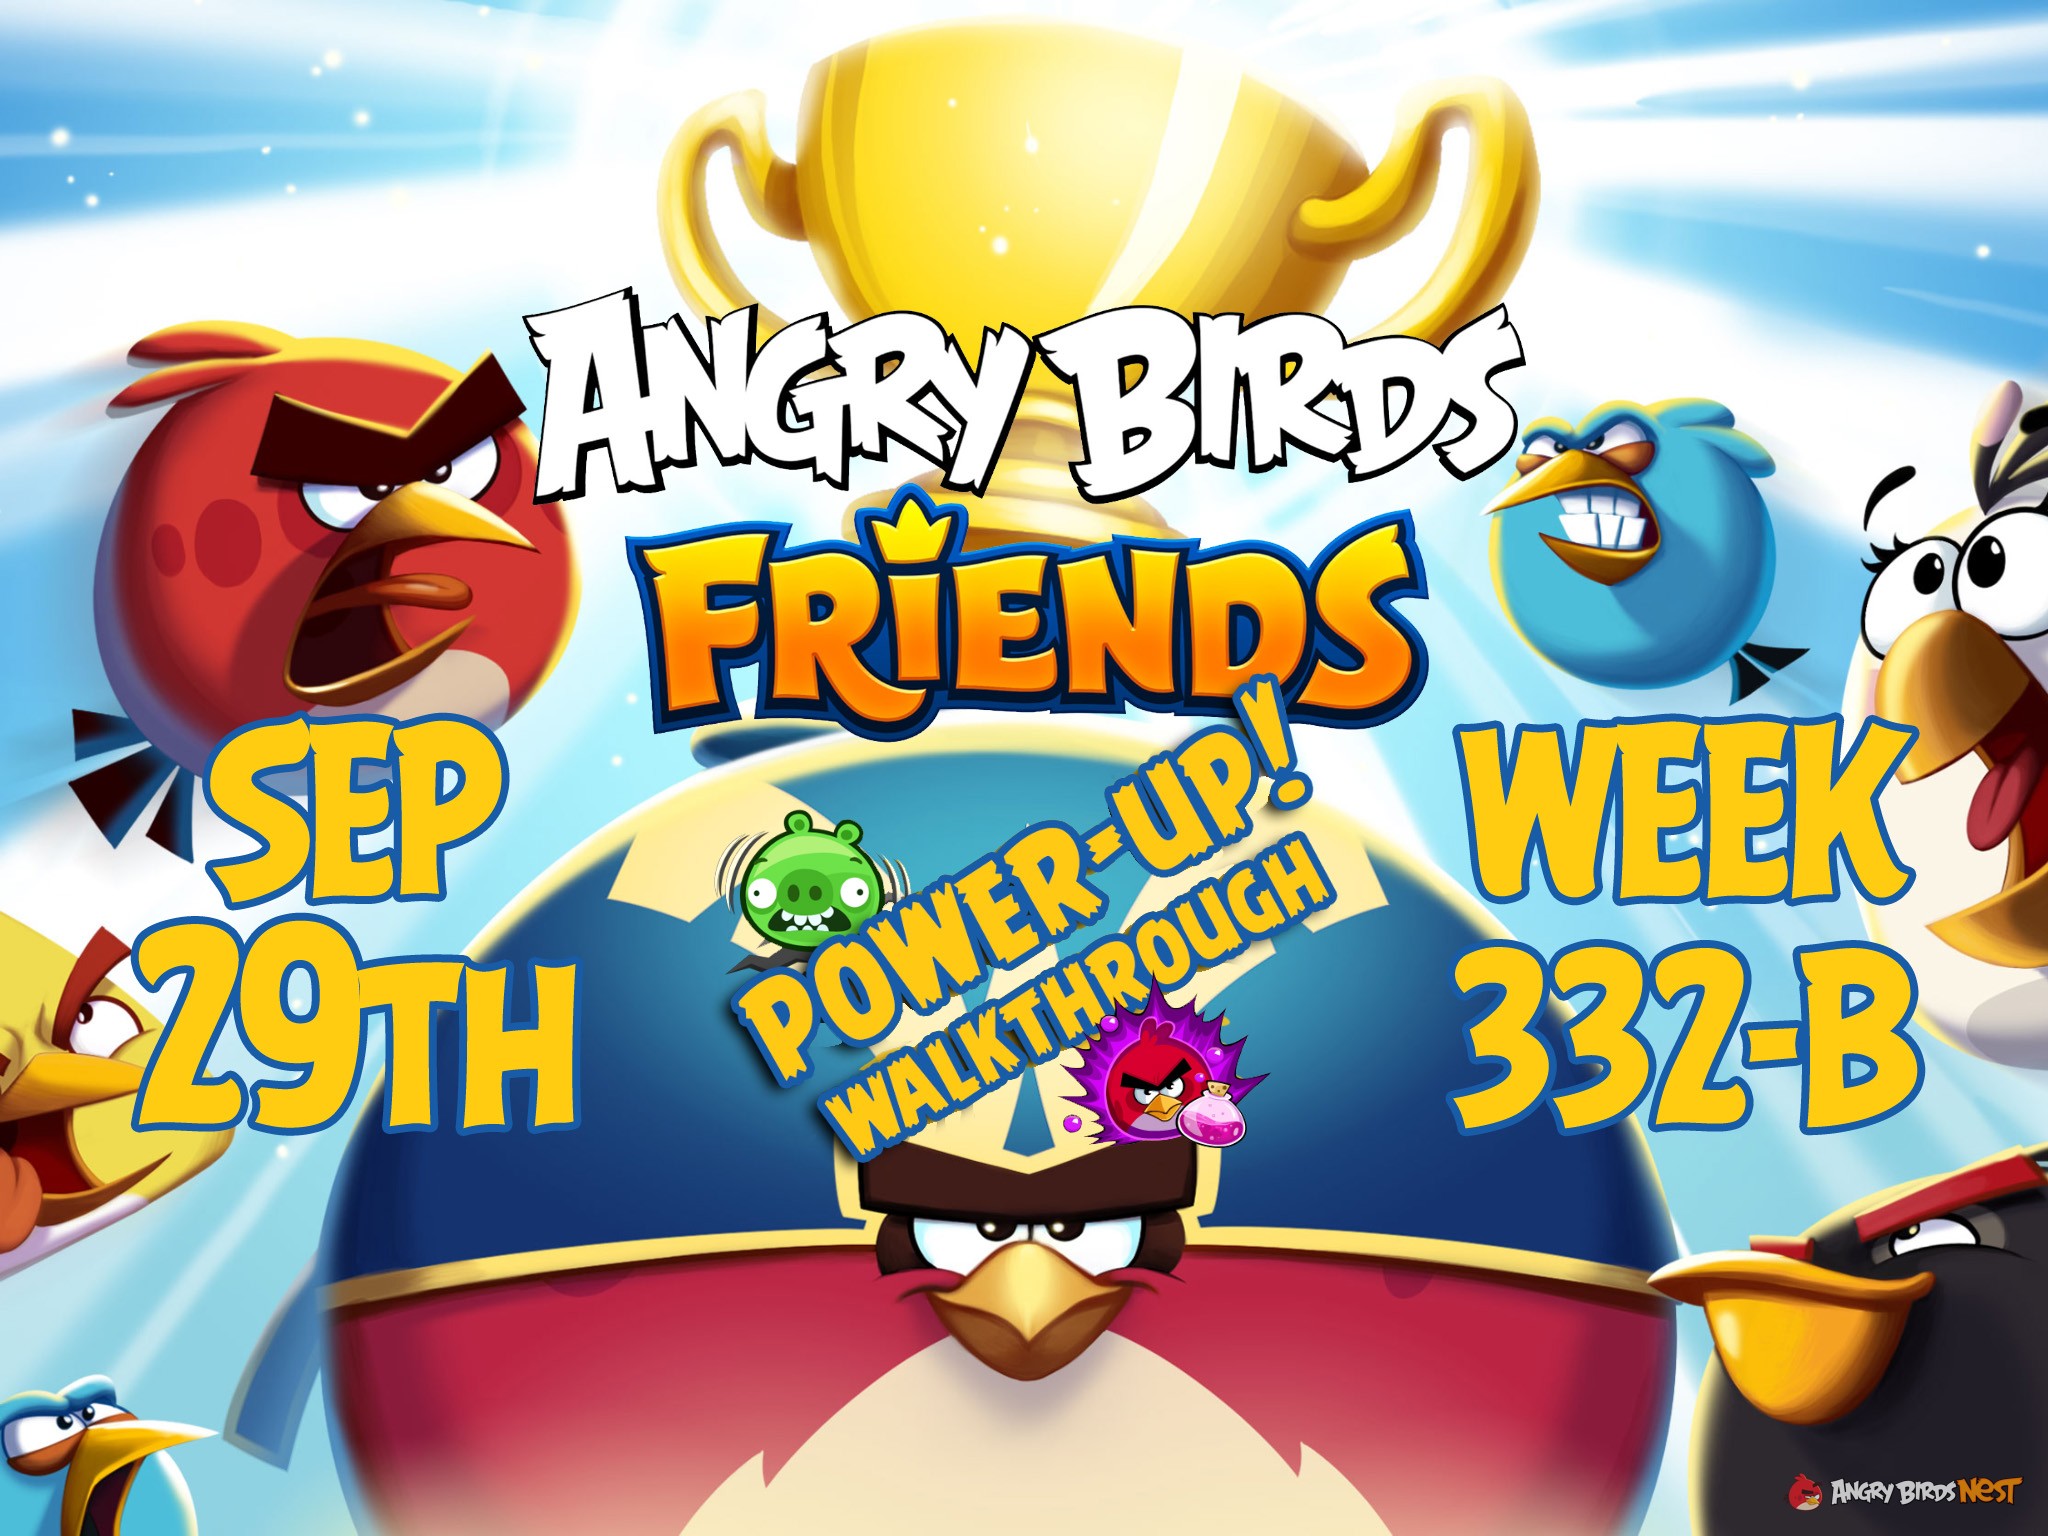 Angry-Birds-Friends-Tournament-Week-332-B-Feature-Image-PU